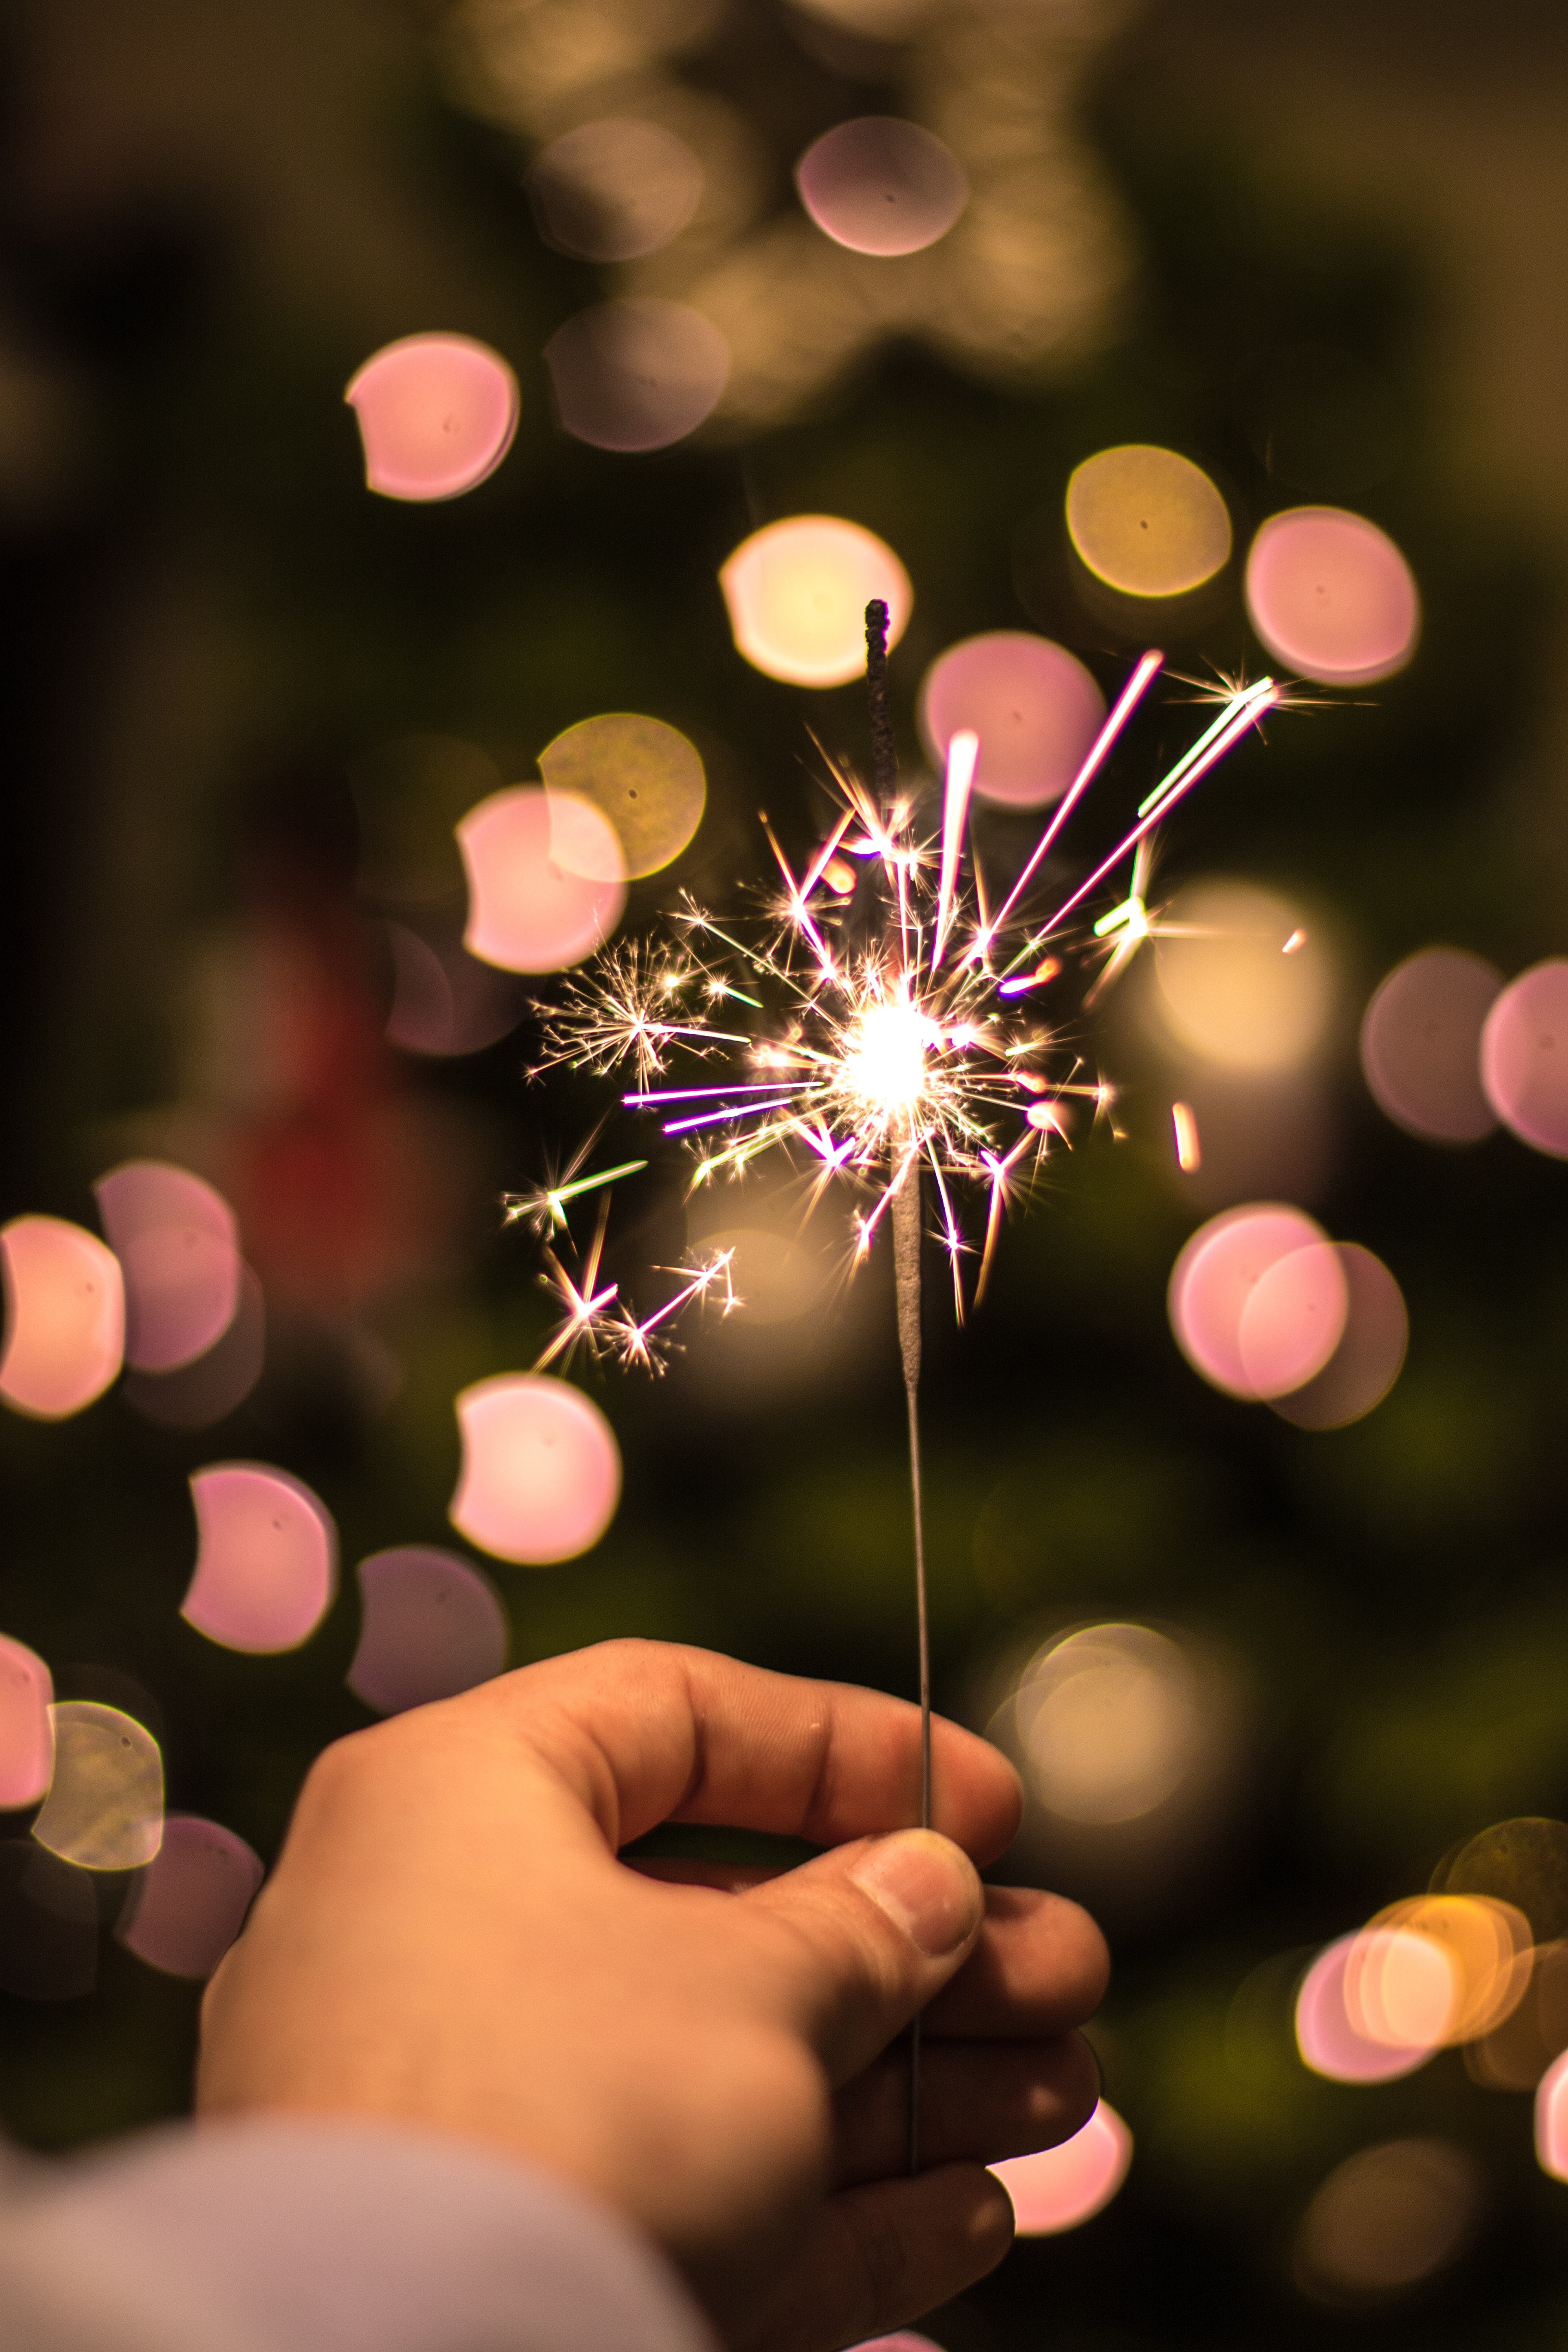 A person holding up sparklers in front of christmas tree - Birthday